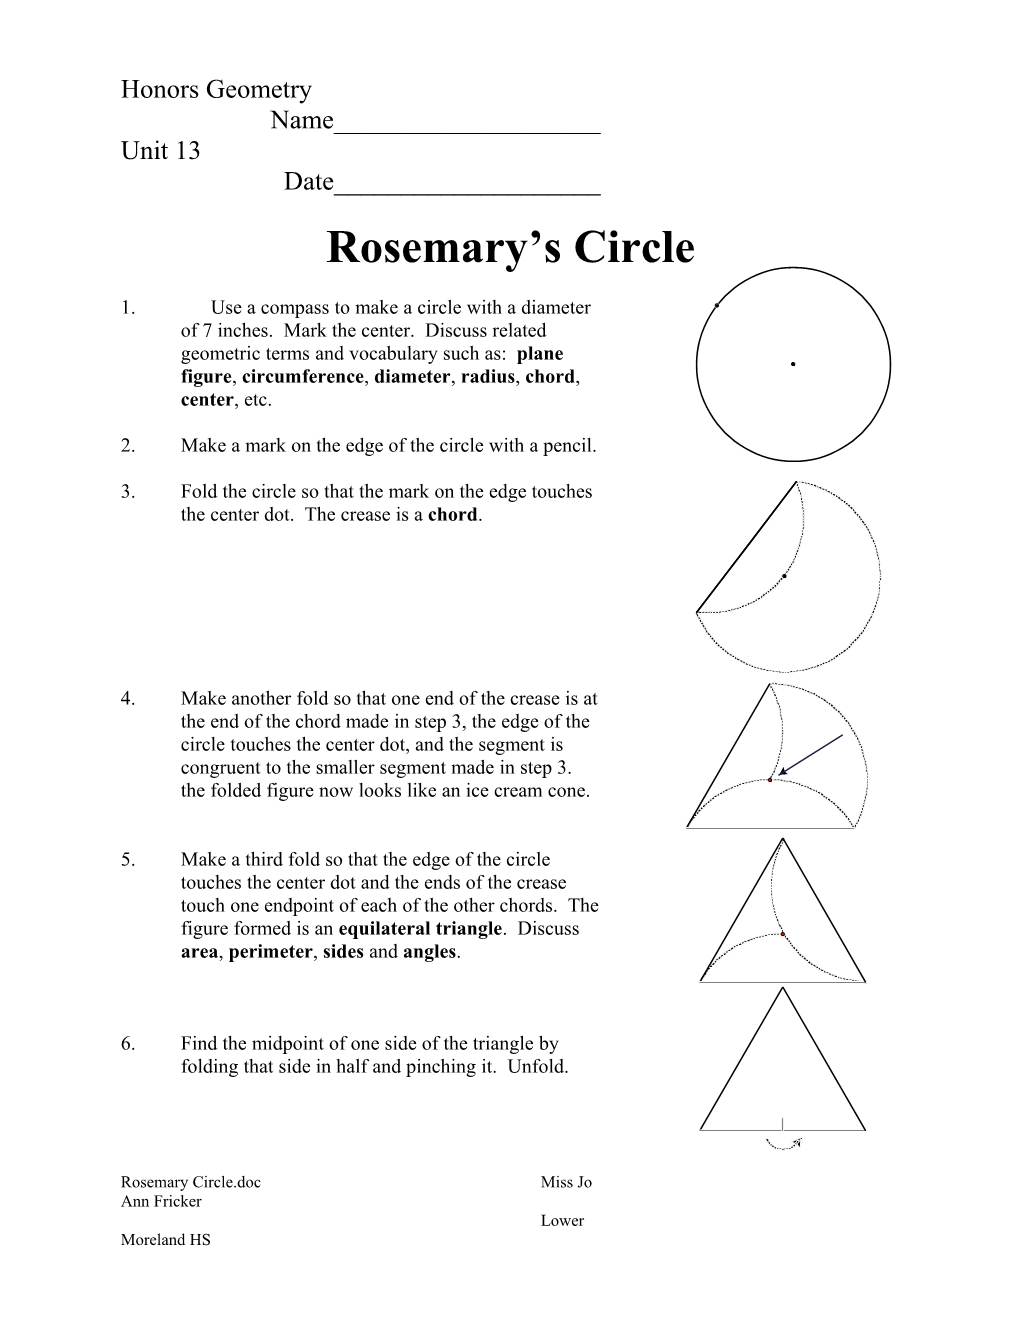 Honors Geometrypage 1